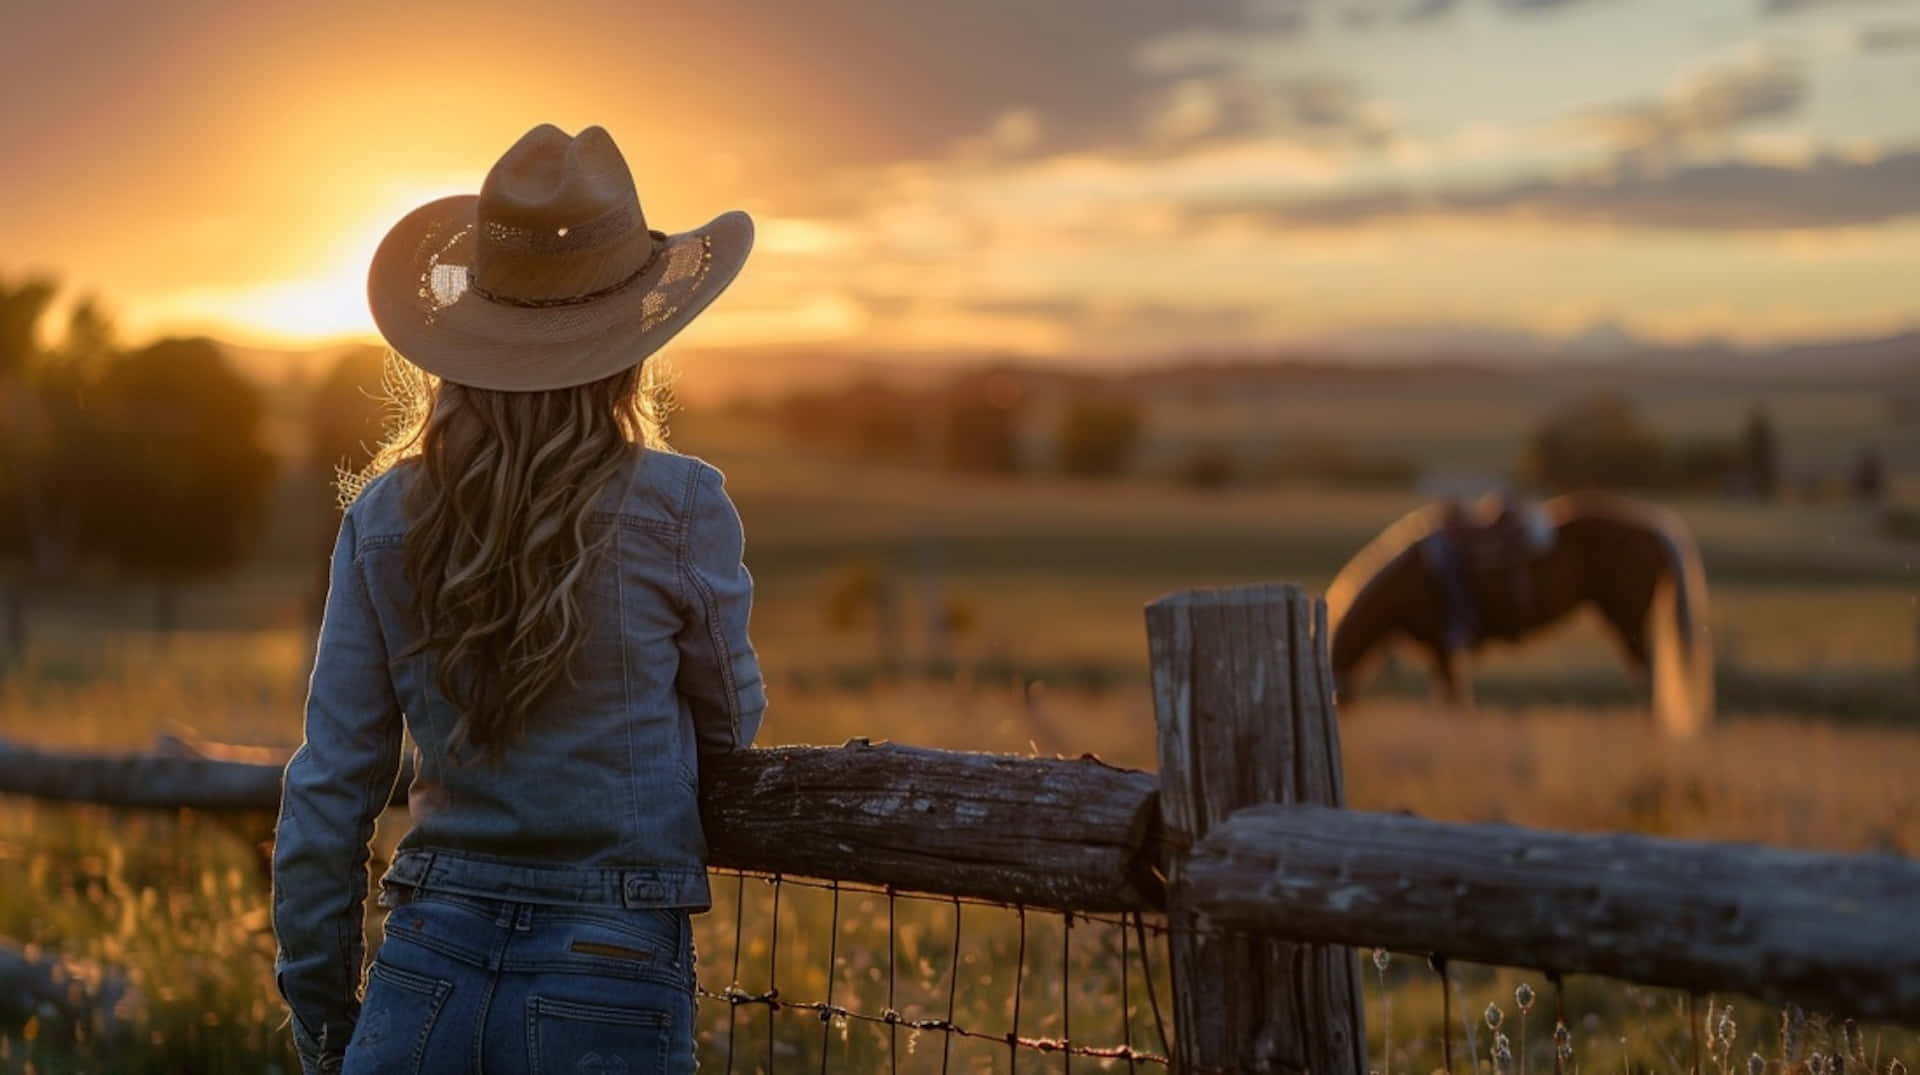 Sunset Cowgirl Gazing Over Fence Wallpaper